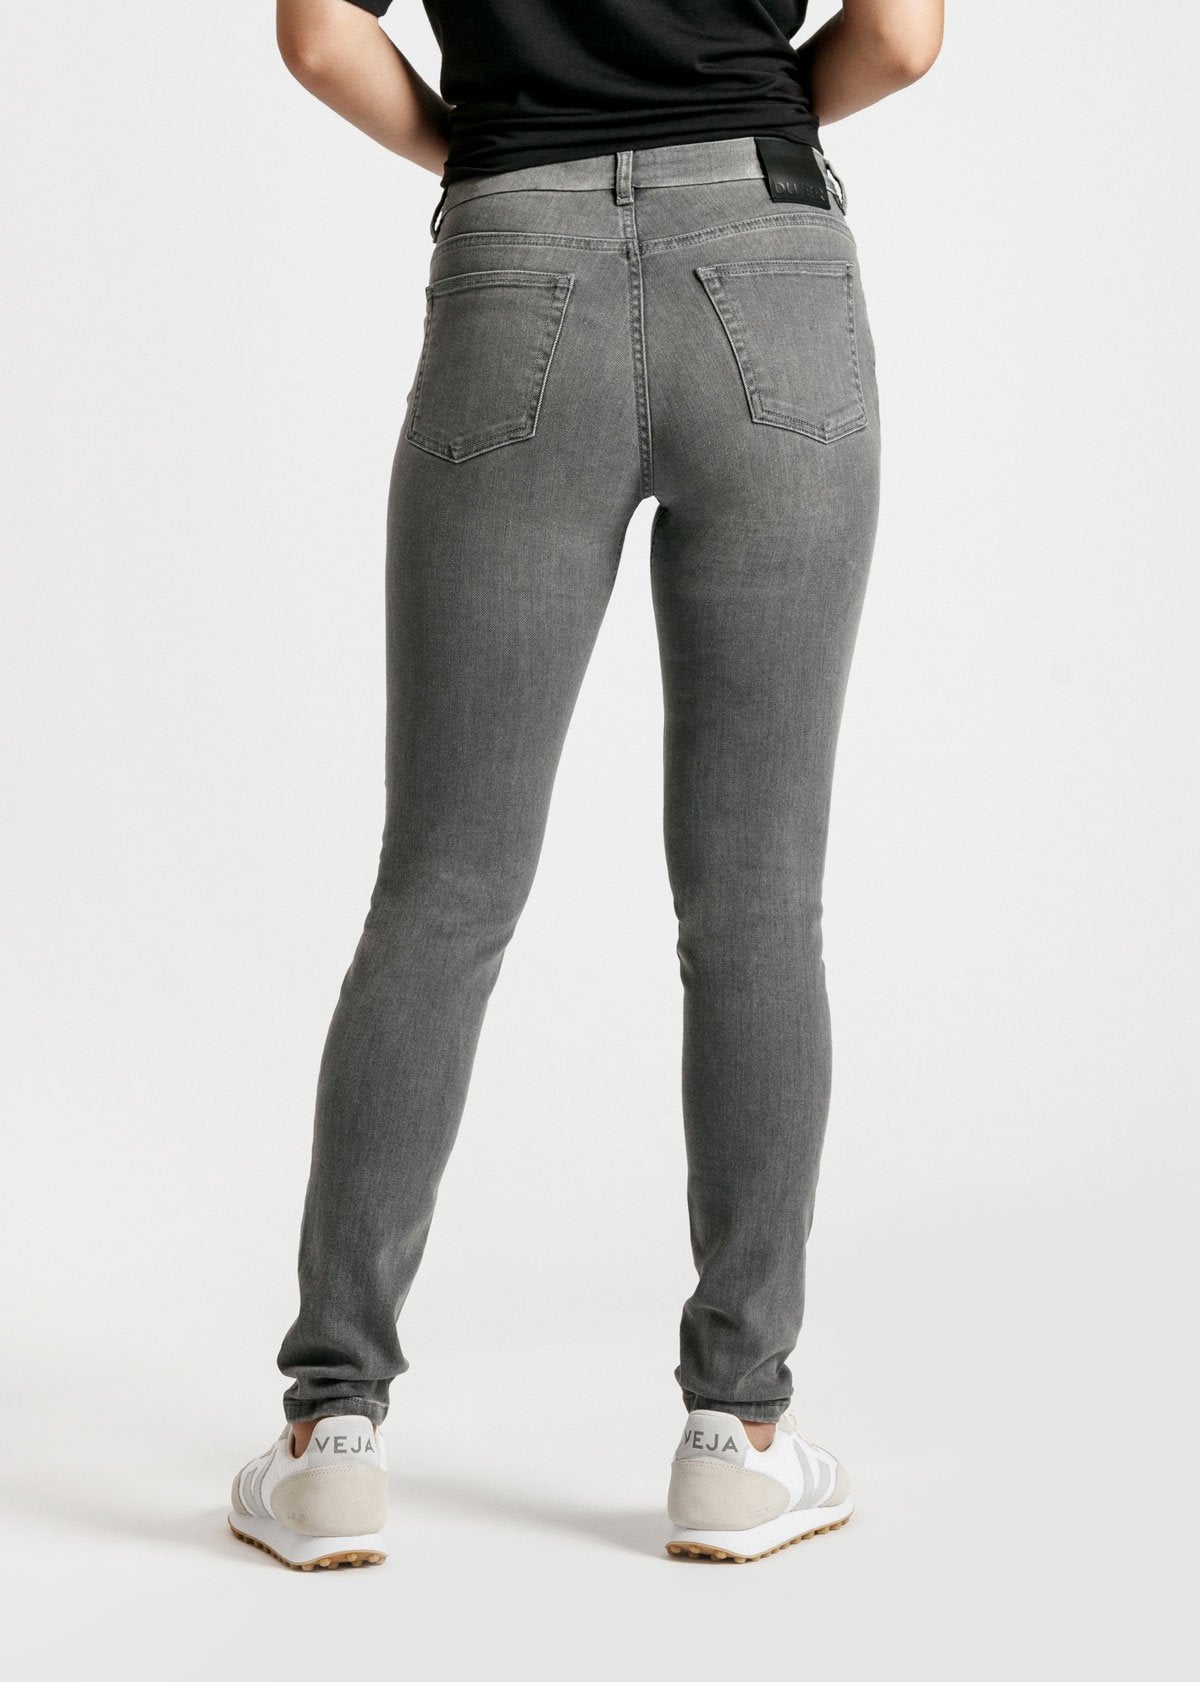 womens grey mid rise skinny fit stretch jeans back